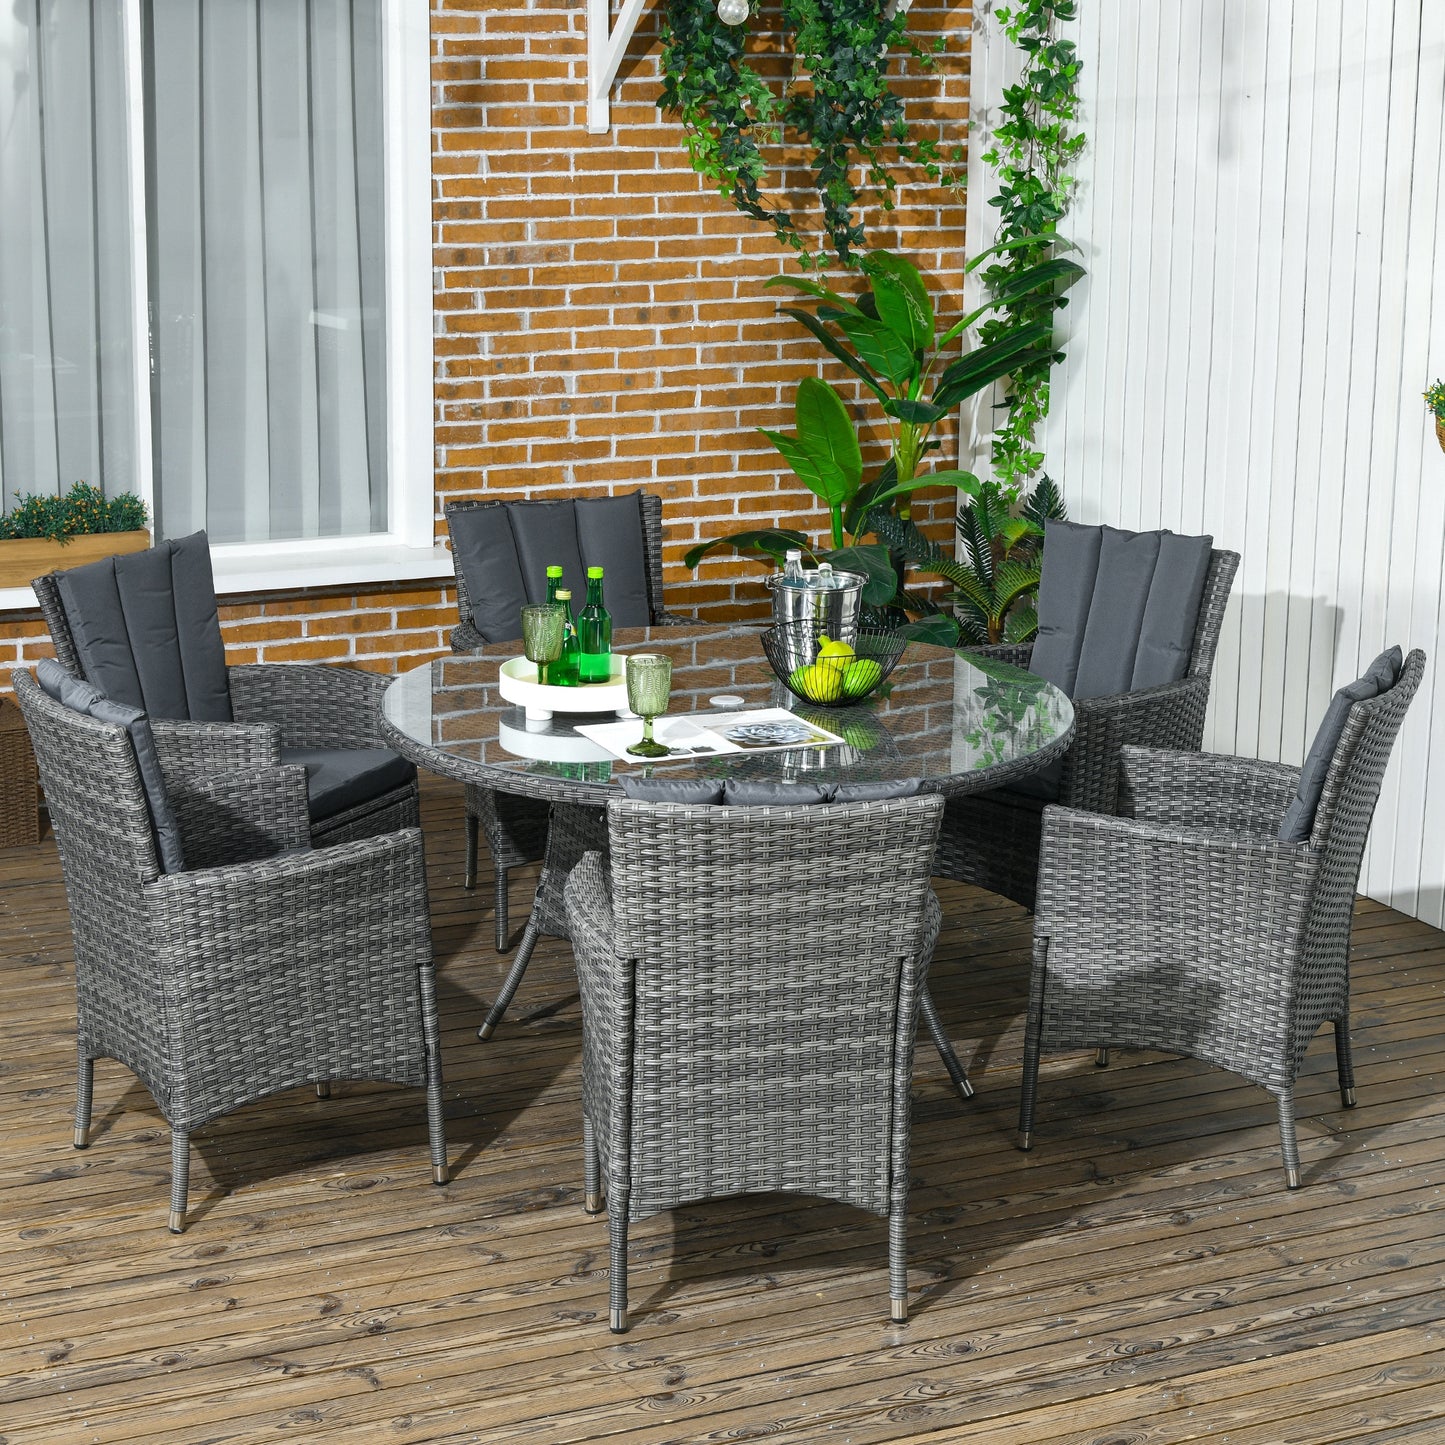 Outsunny 7 Pieces PE Rattan Dining Set w/ Cushions, Garden Furniture Set w/ Six Armchairs, Patio Conservatory w/ Tempered Glass Tabletop